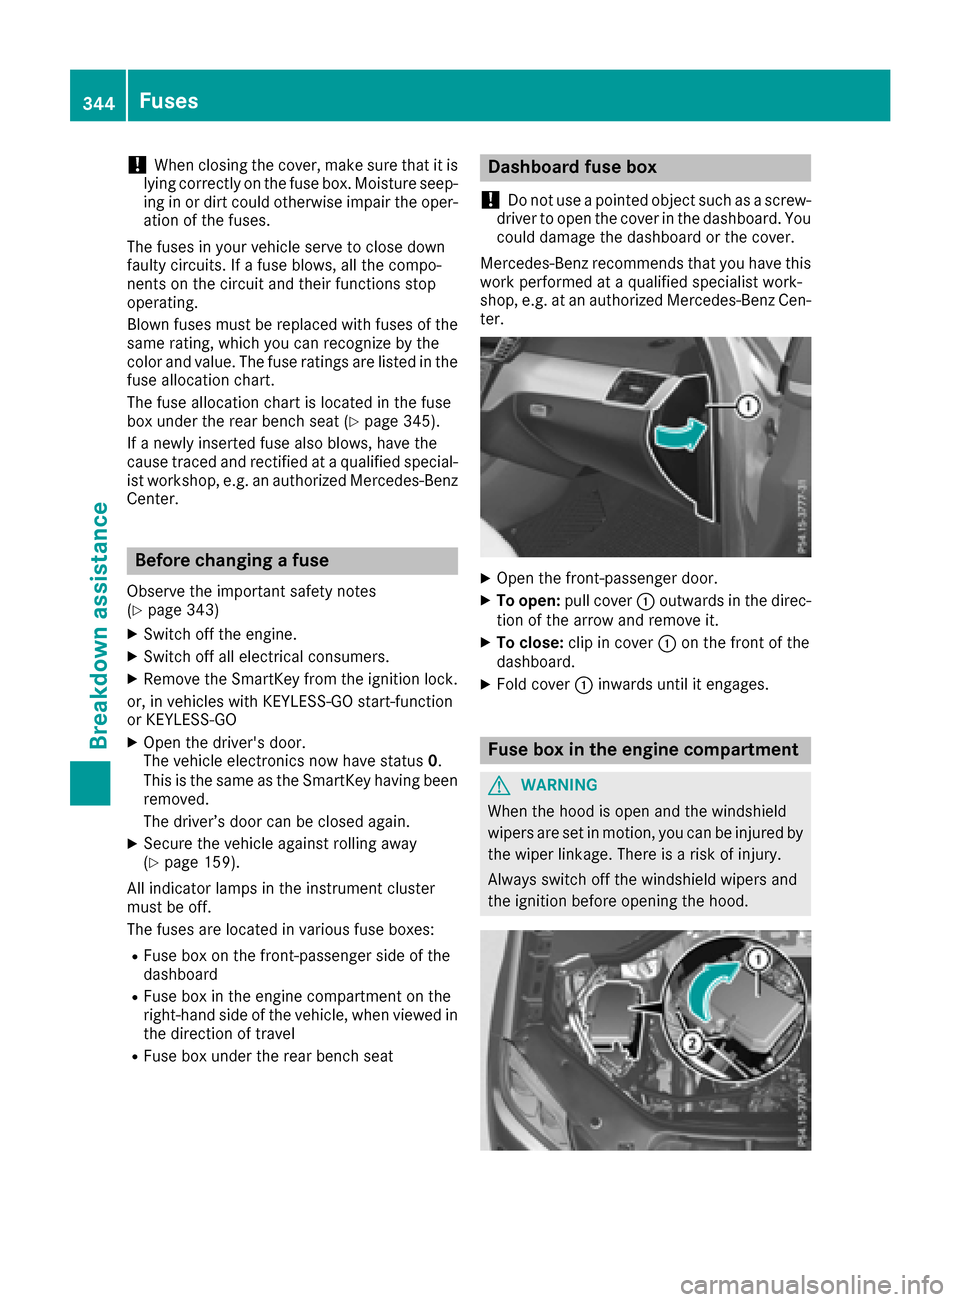 MERCEDES-BENZ GLS-Class SUV 2017 X166 Owners Manual !When closing the cover, make sure that it is
lying correctly on the fuse box. Moisture seep-
ing in or dirt could otherwise impair the oper-
ation of the fuses.
The fuses in your vehicle serve to clo